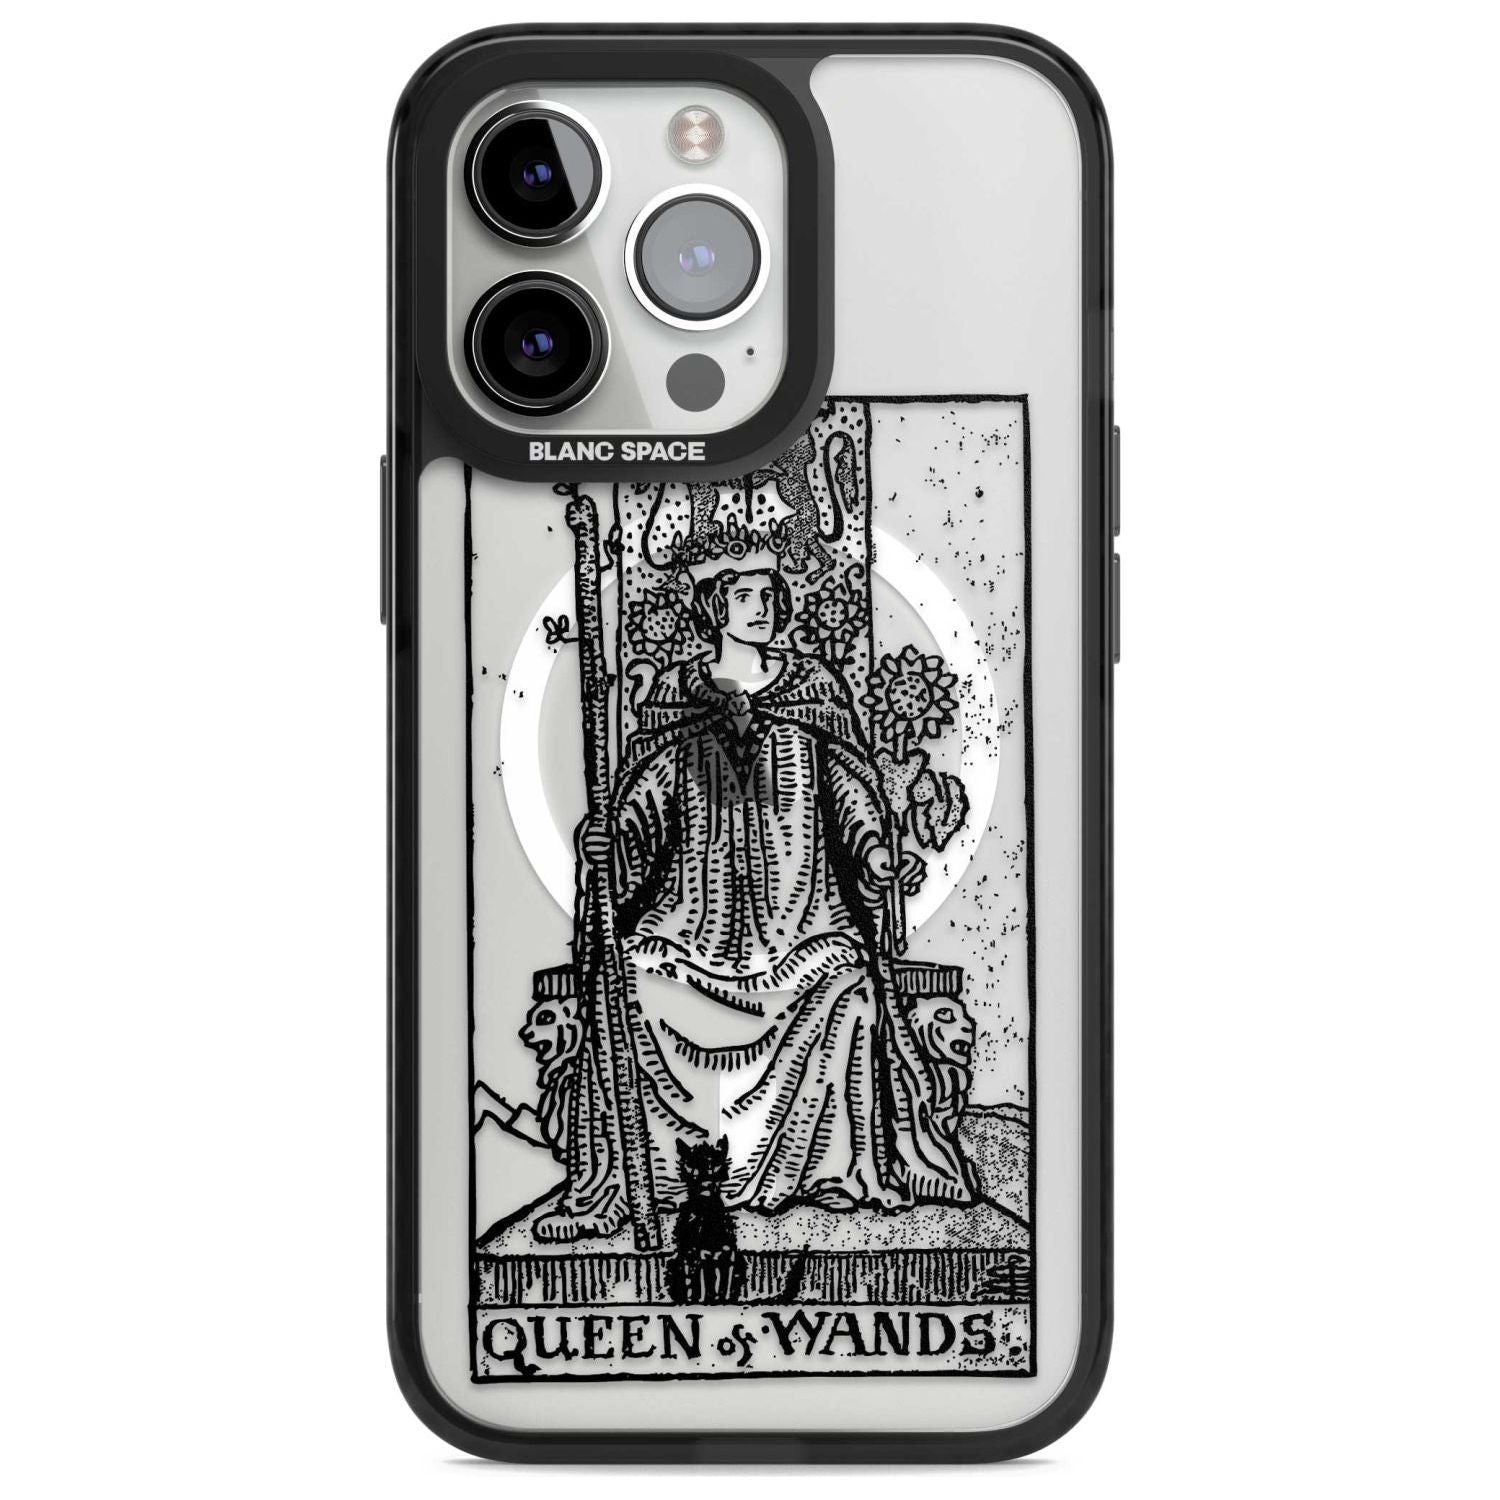 Personalised Queen of Wands Tarot Card - Transparent Custom Phone Case iPhone 15 Pro Max / Magsafe Black Impact Case,iPhone 15 Pro / Magsafe Black Impact Case,iPhone 14 Pro Max / Magsafe Black Impact Case,iPhone 14 Pro / Magsafe Black Impact Case,iPhone 13 Pro / Magsafe Black Impact Case Blanc Space